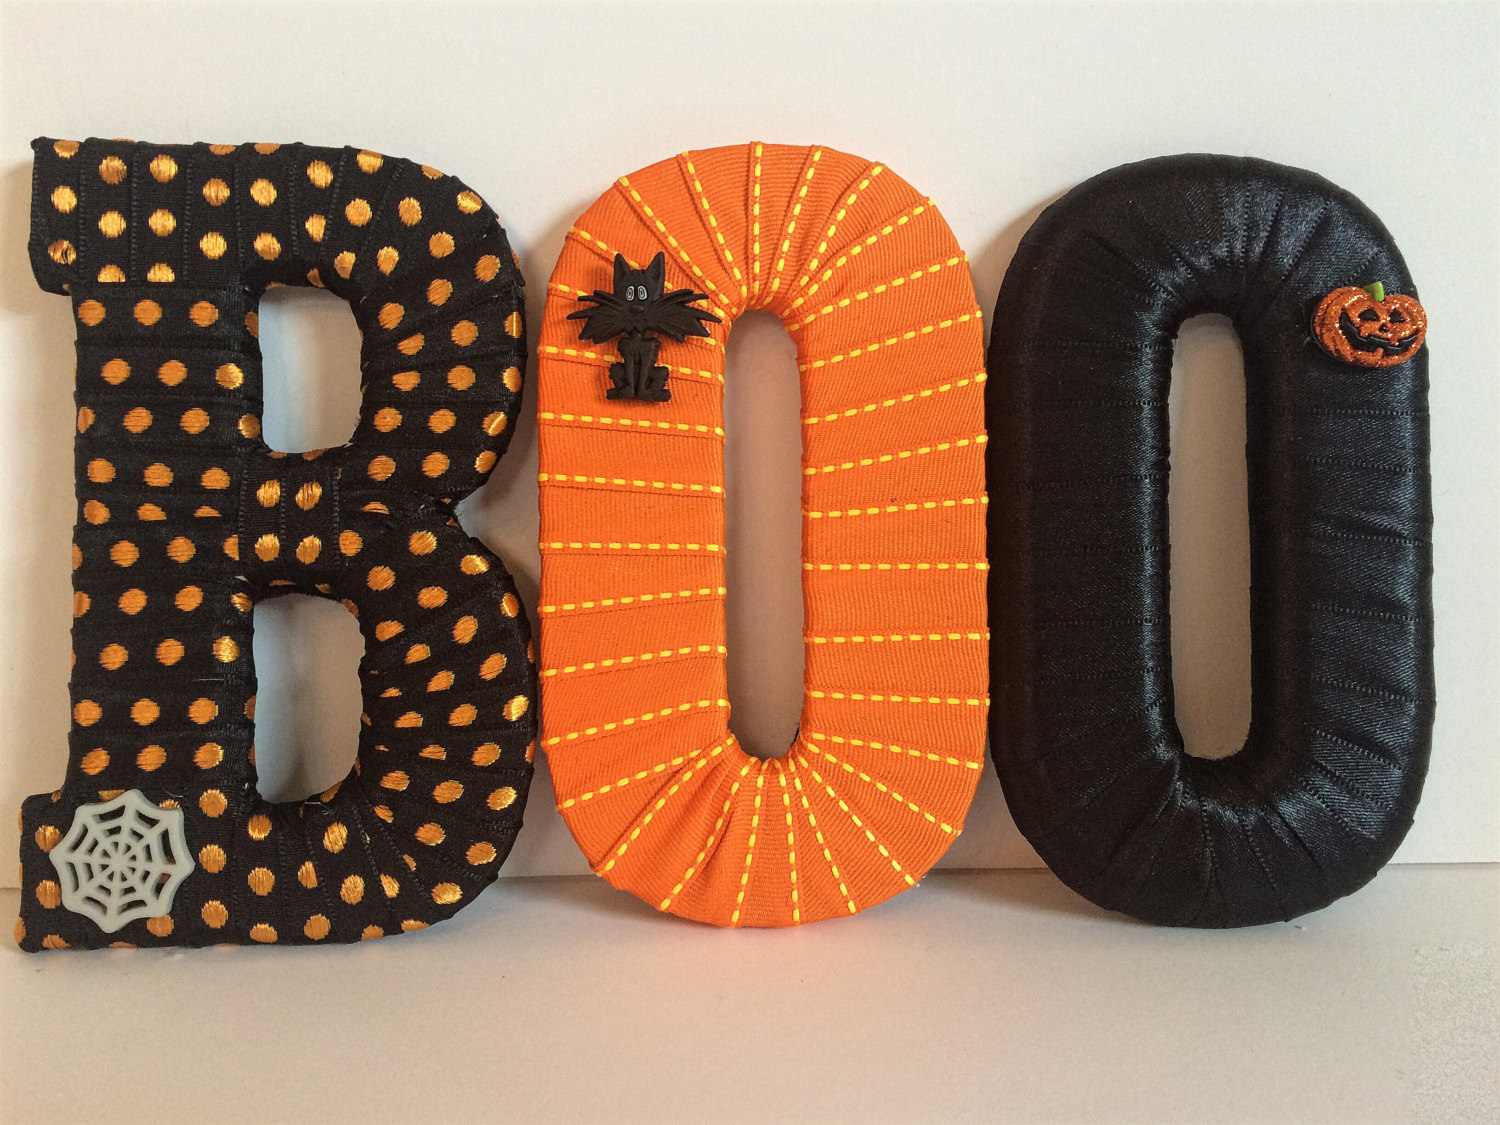 Halloween Decor Sale
 SALE Halloween Decor Decorative Letter Set by